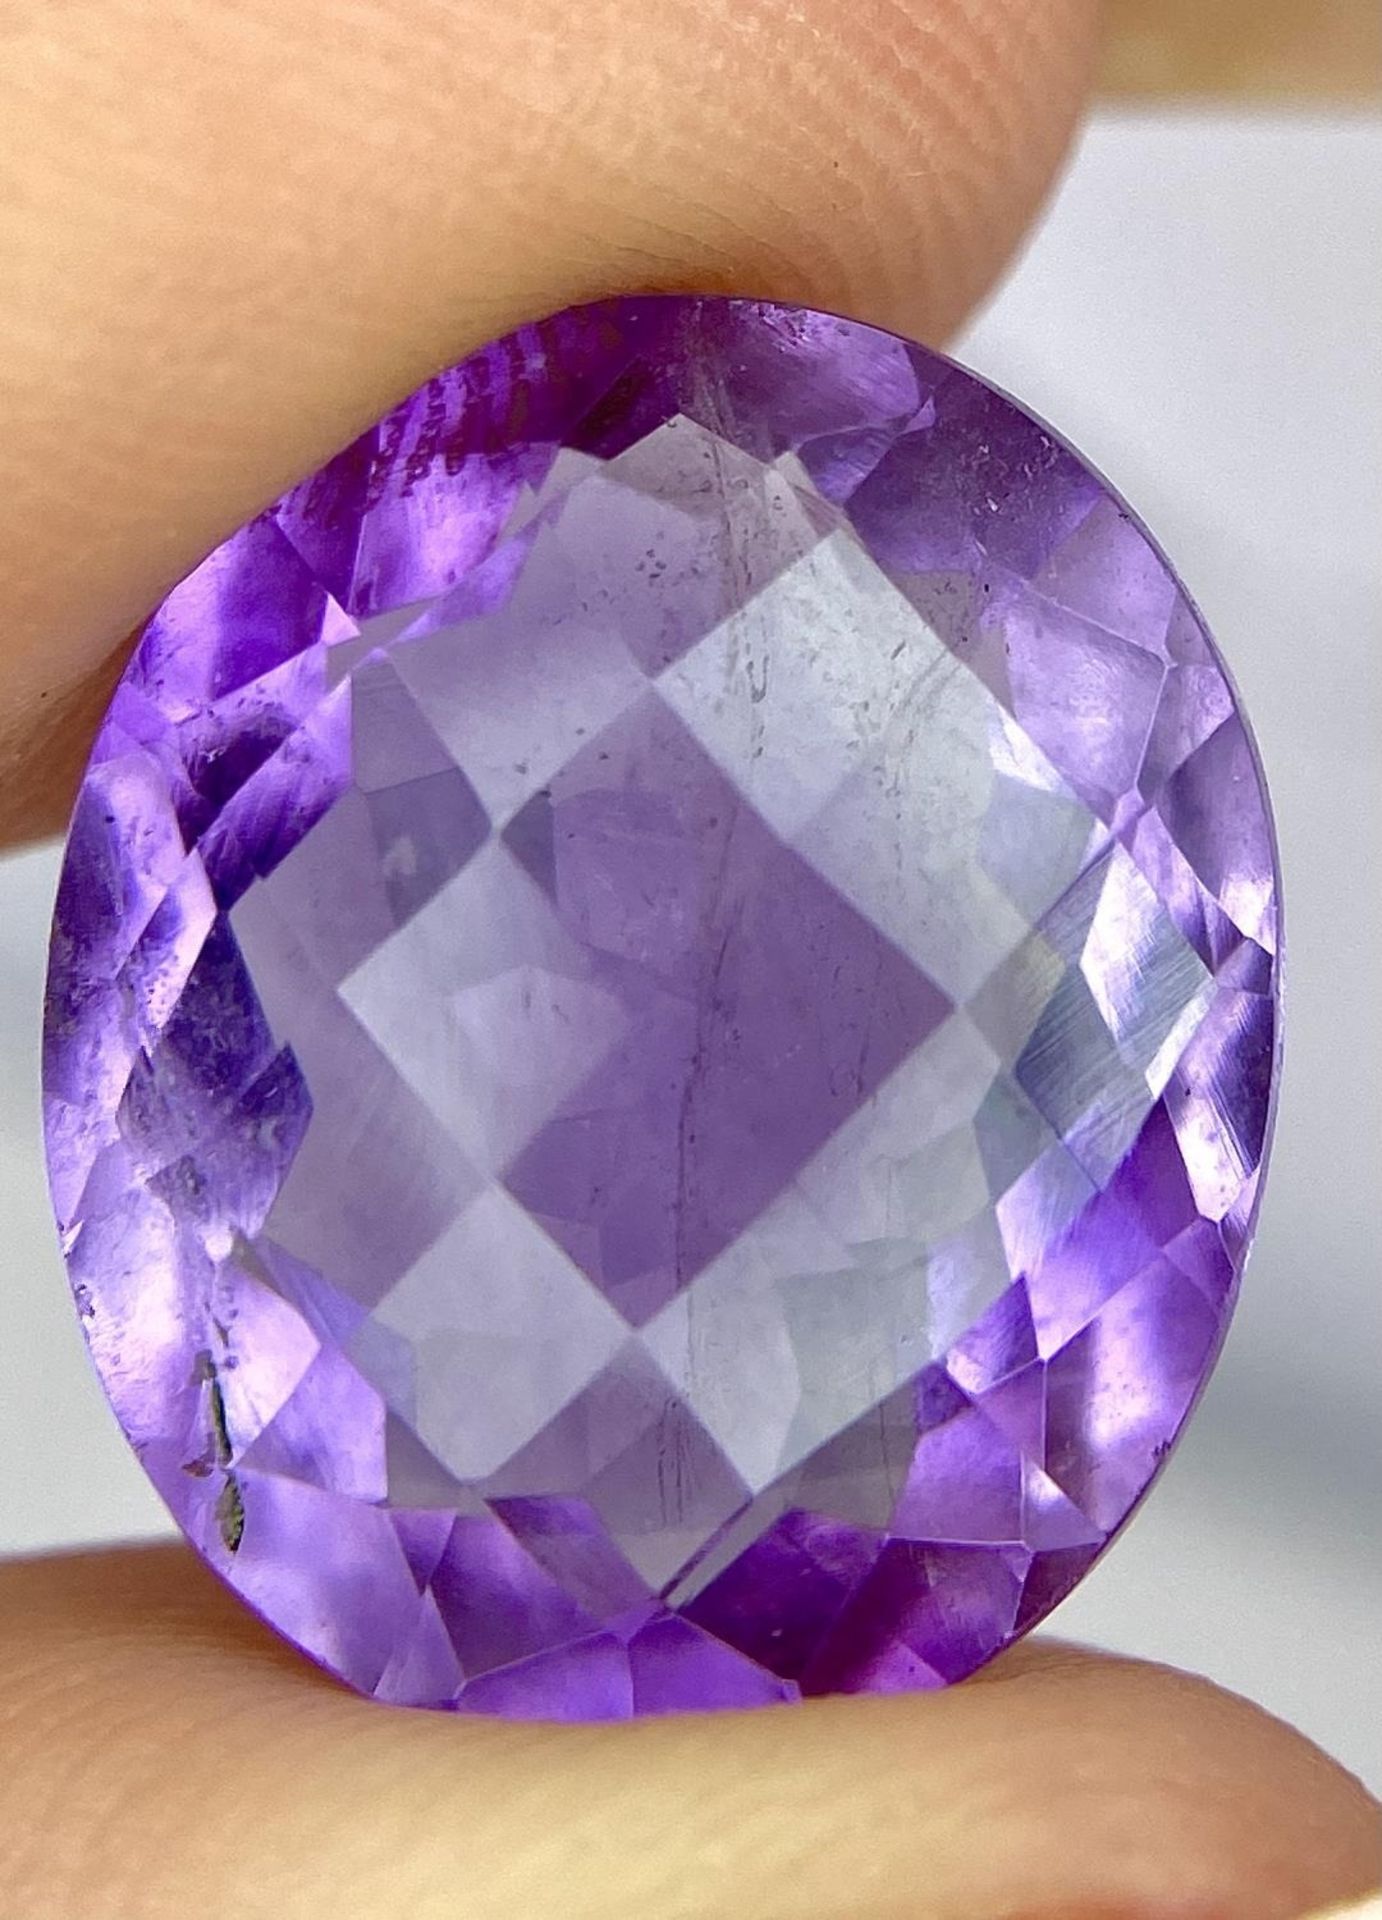 An 11.60ct Oval Faceted Amethyst - IDT Certified. - Image 4 of 5